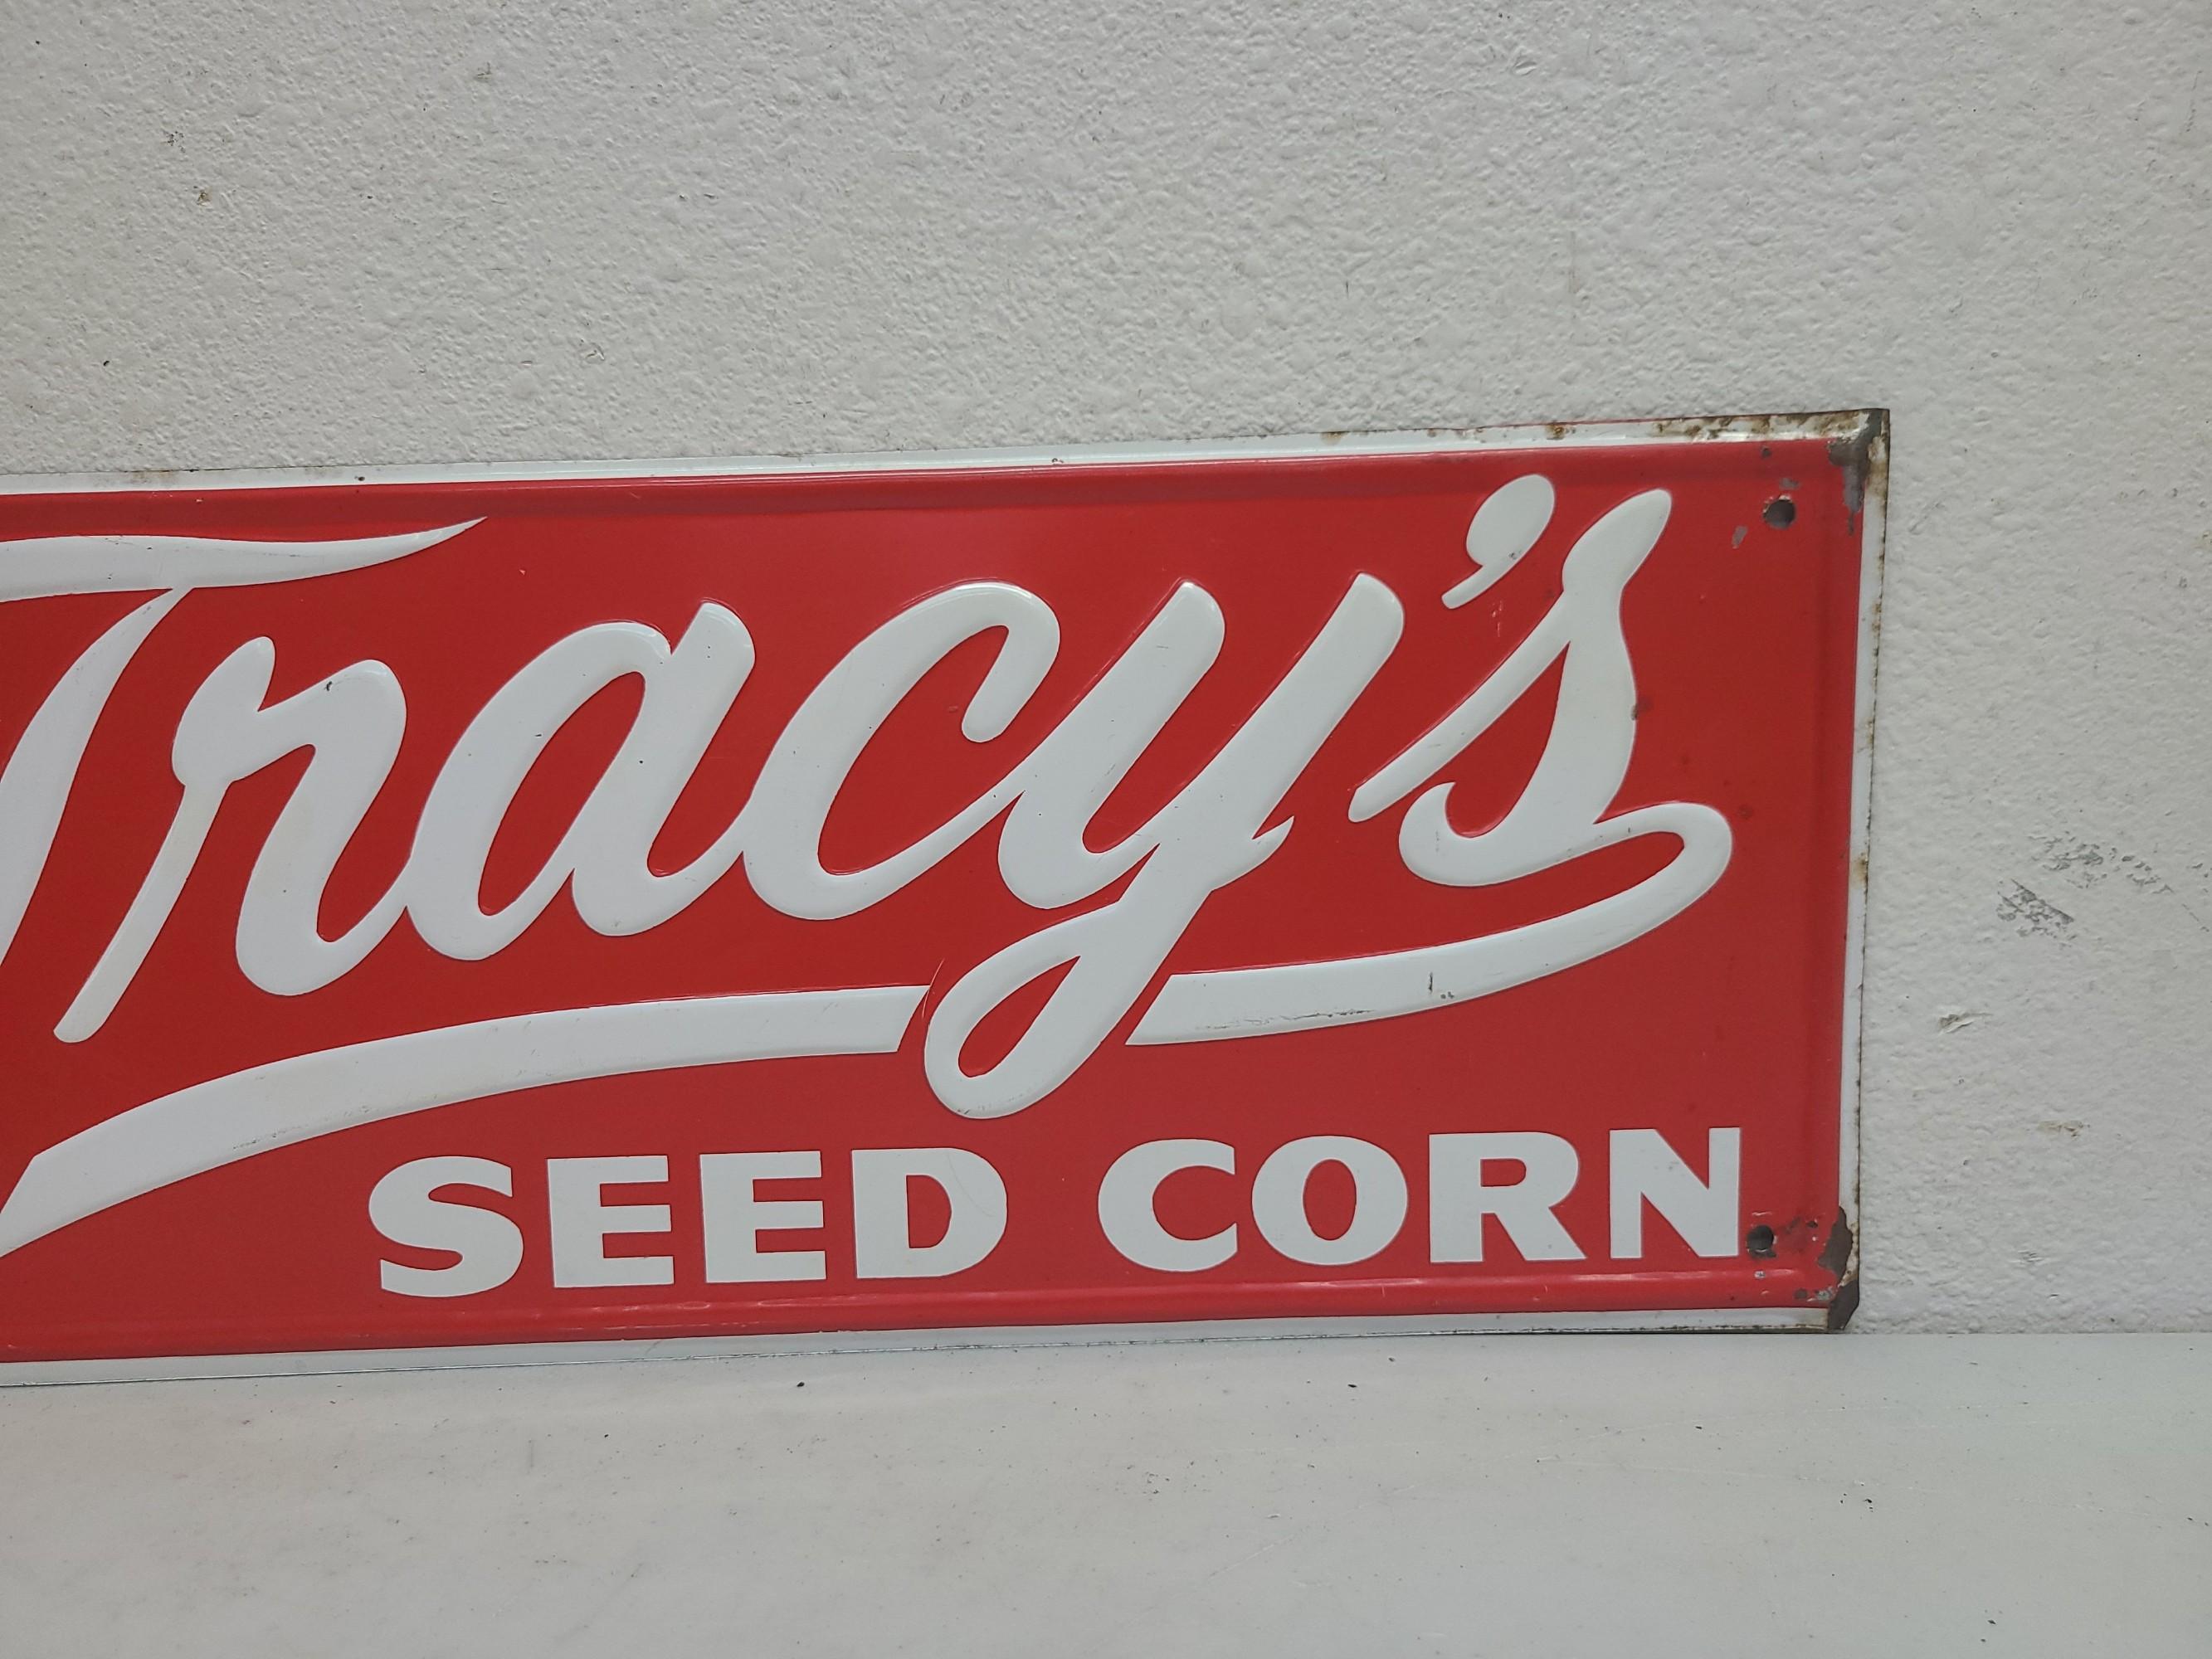 SST Embossed, Tracy's Seed Corn Sign